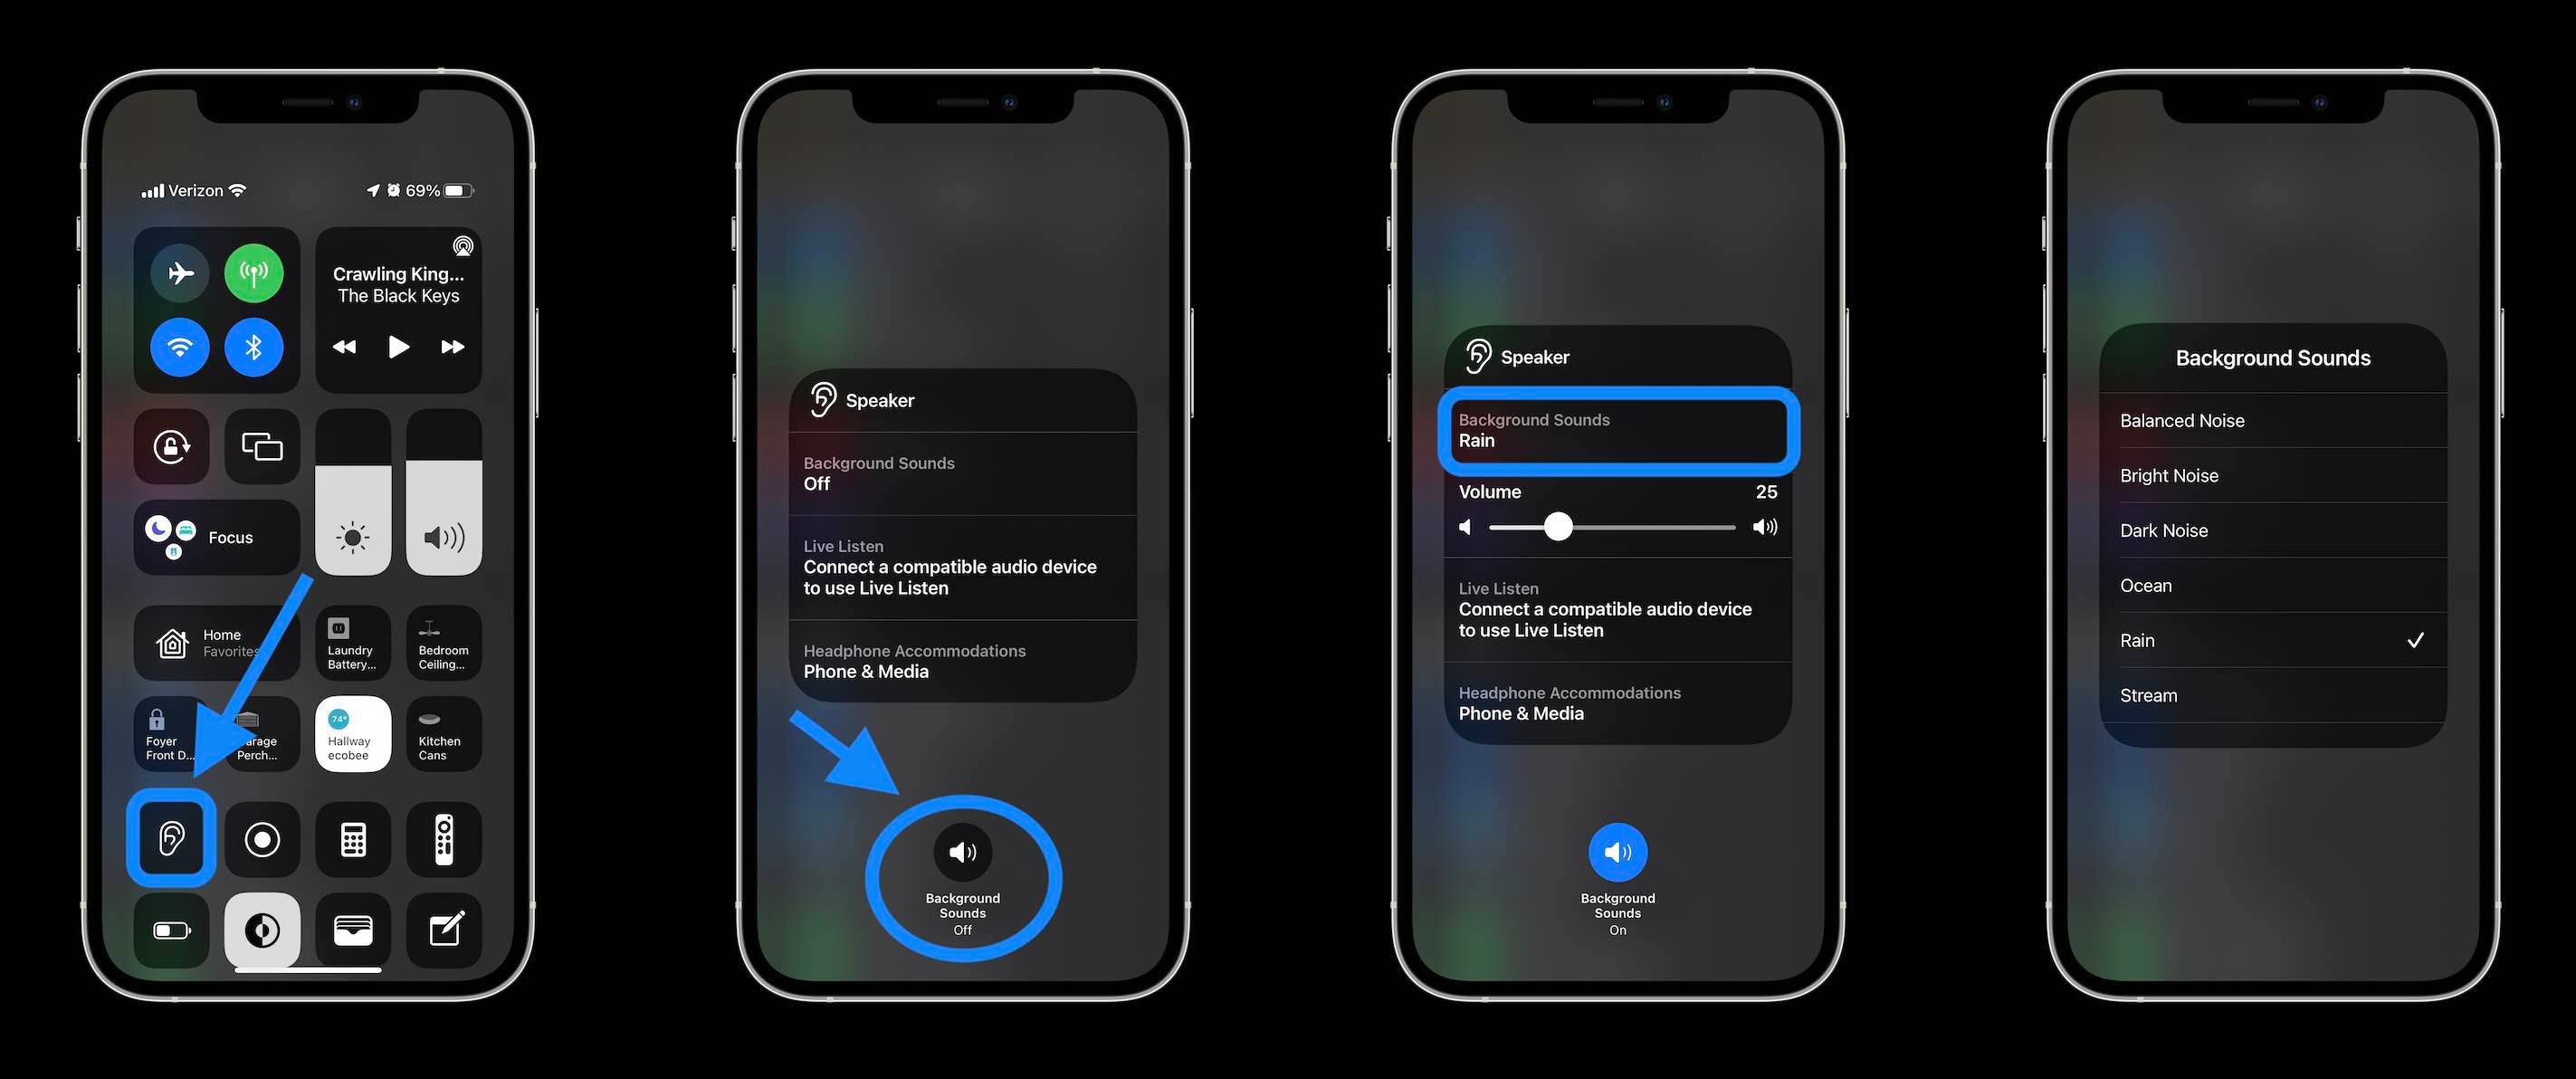 How to use iPhone Background Sounds in iOS 15 Control Center